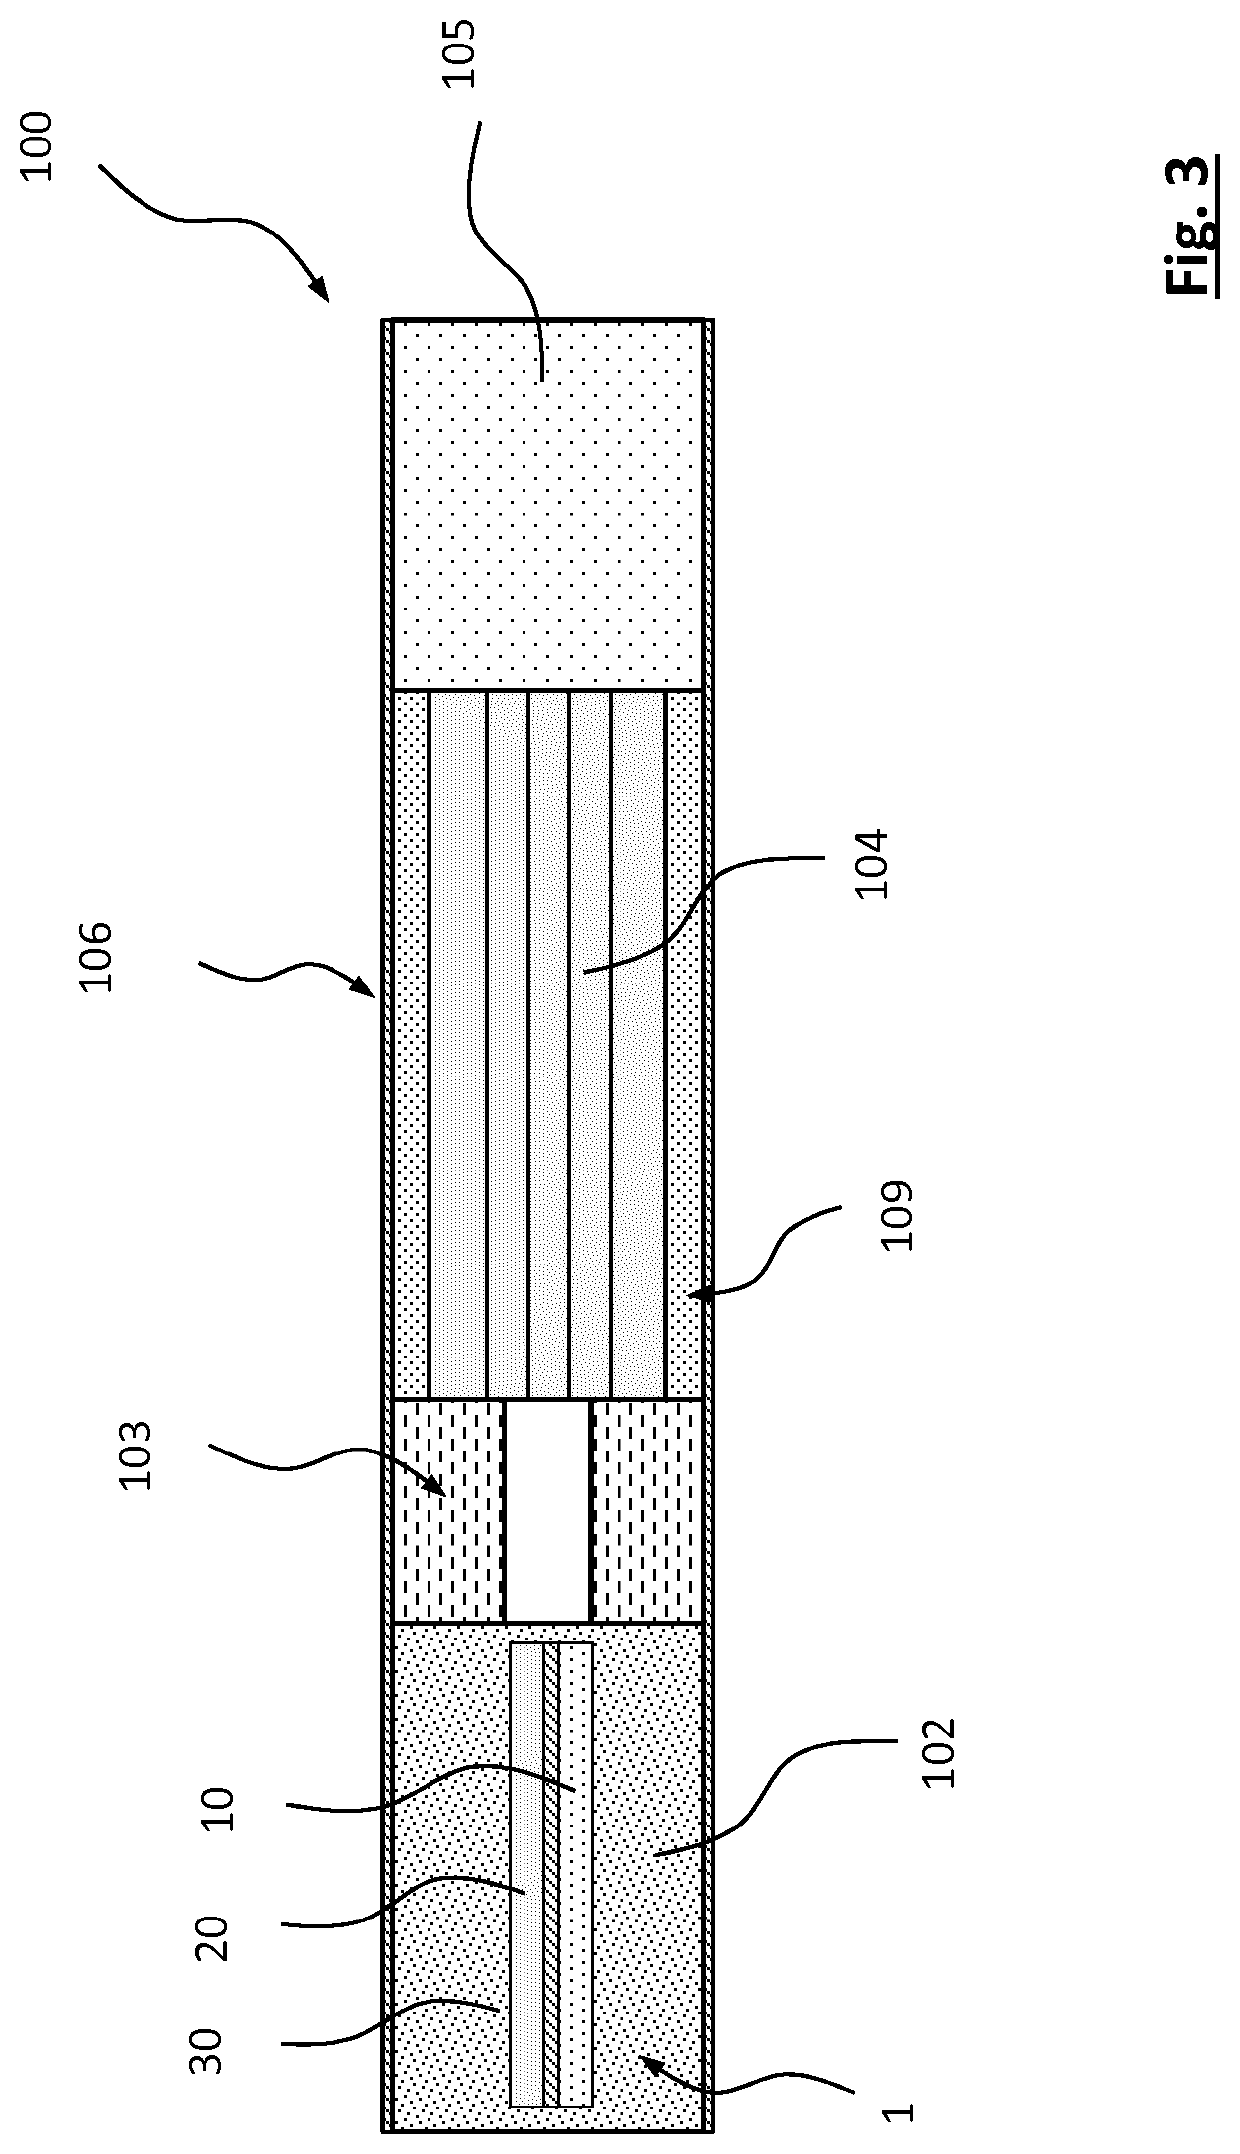 Multi-layer susceptor assembly for inductively heating an aerosol-forming substrate